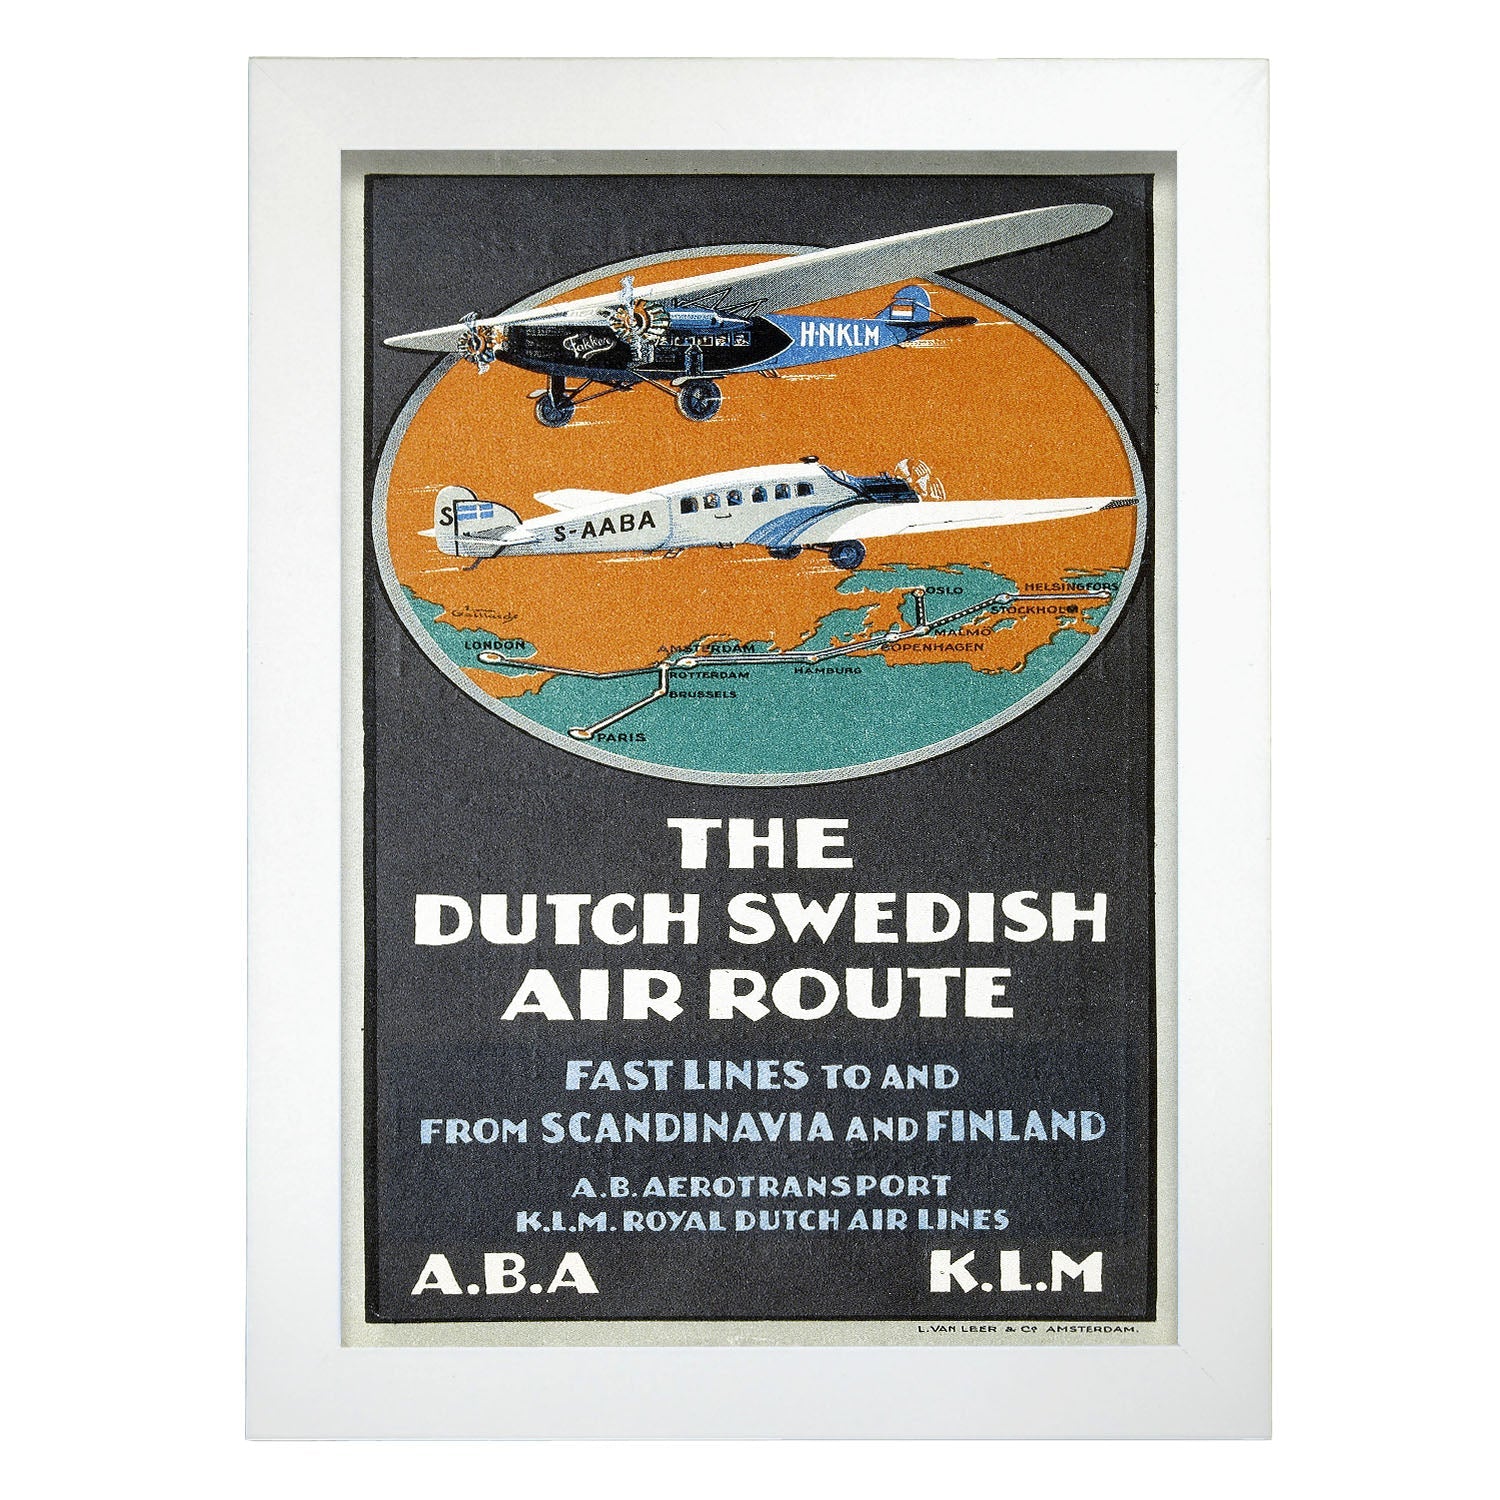 ABA_Advertisment_leaflet_about_The_Dutch_Swedish_Air_Route_by_ABA_and_KLM-Artwork-Nacnic-A4-Marco Blanco-Nacnic Estudio SL